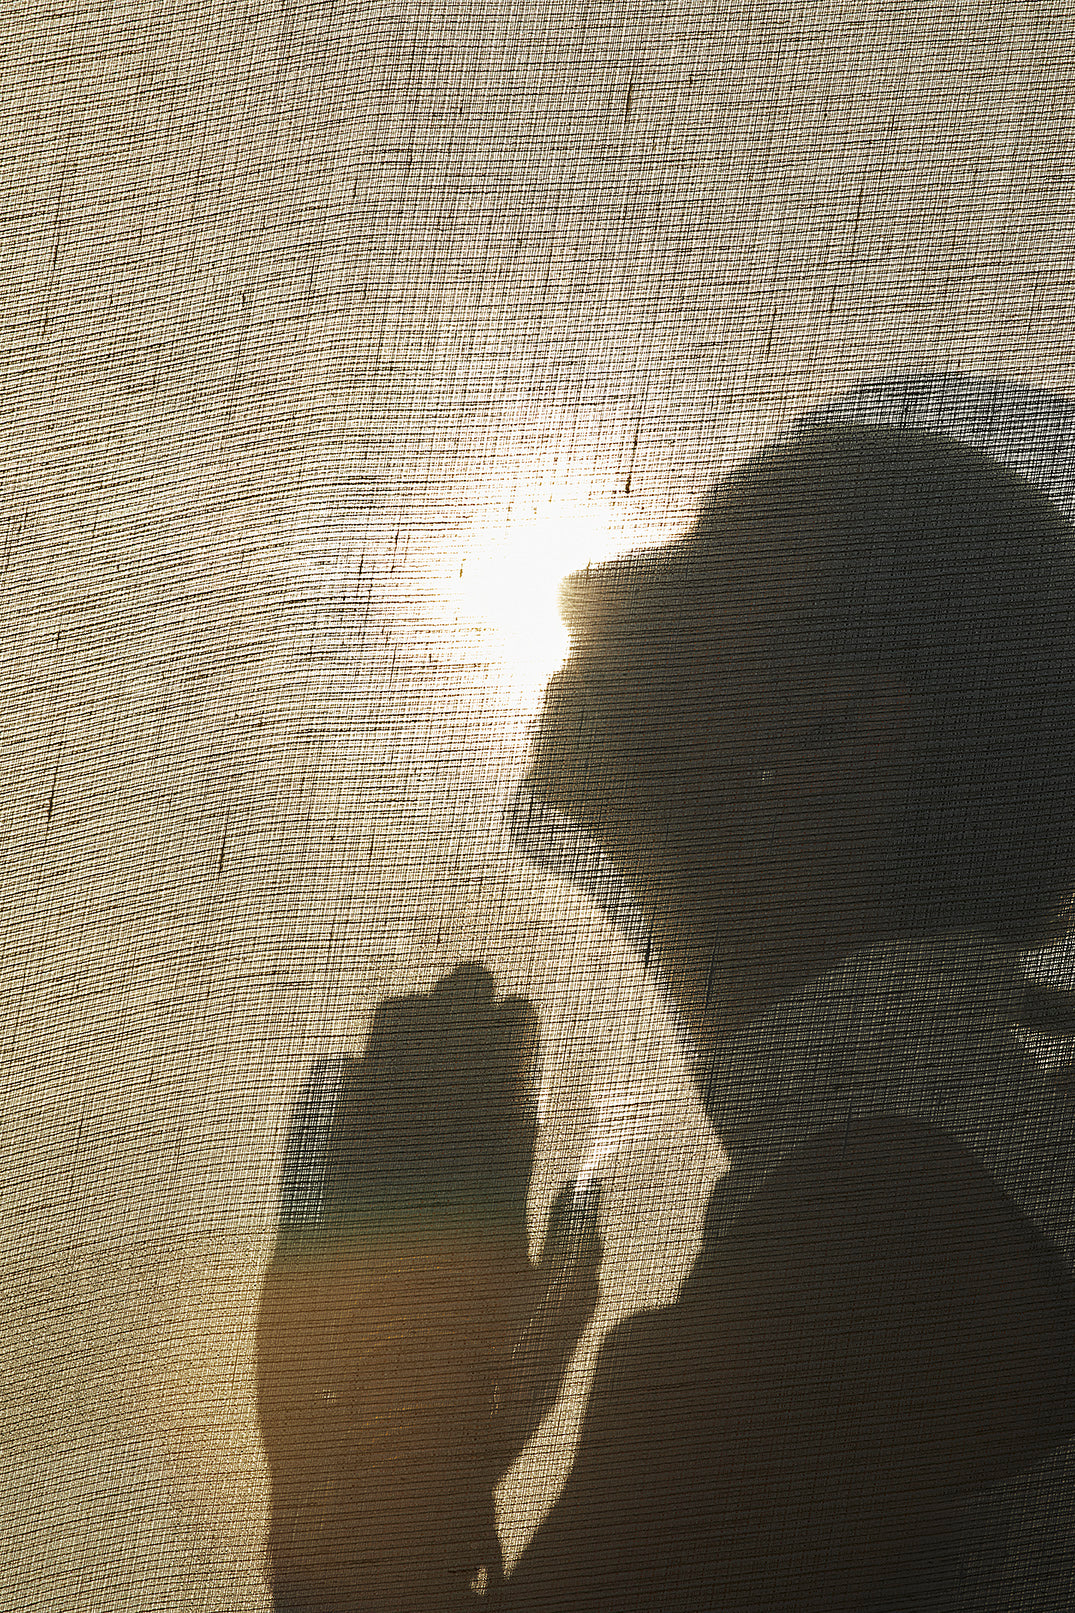 Person's sits, praying, silhouetted behind a linen cloth. 